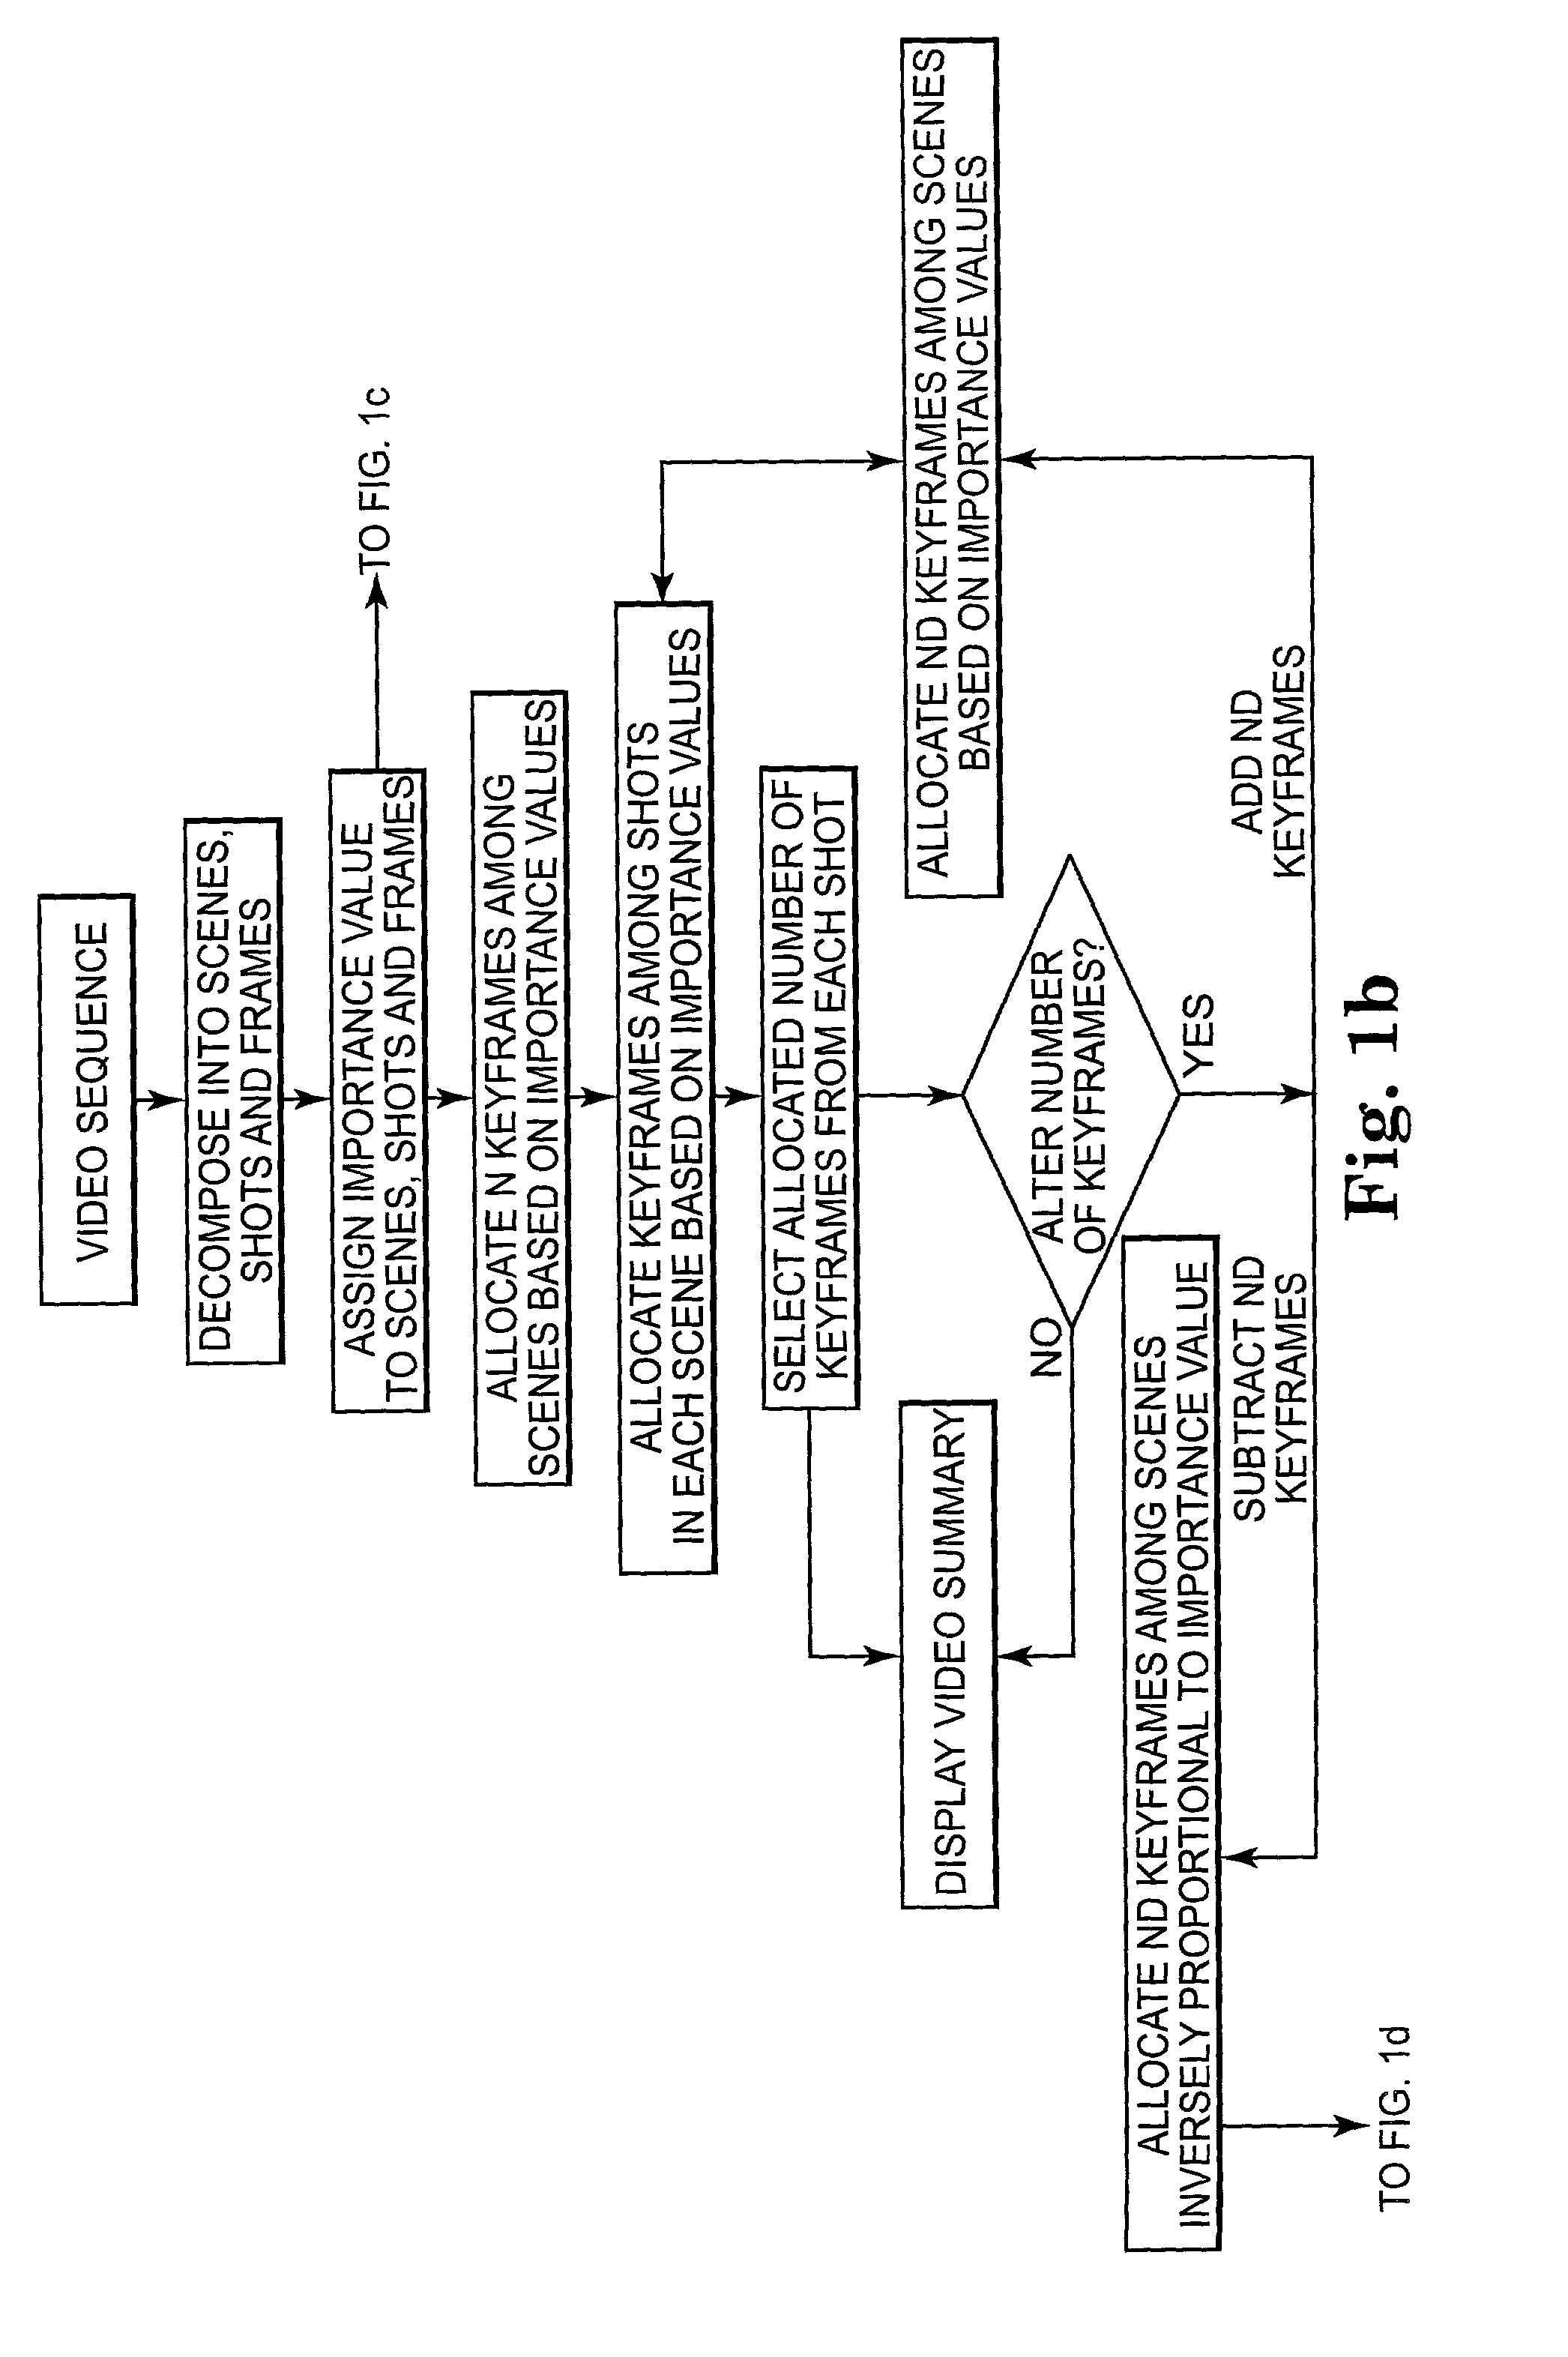 Scalable video summarization and navigation system and method